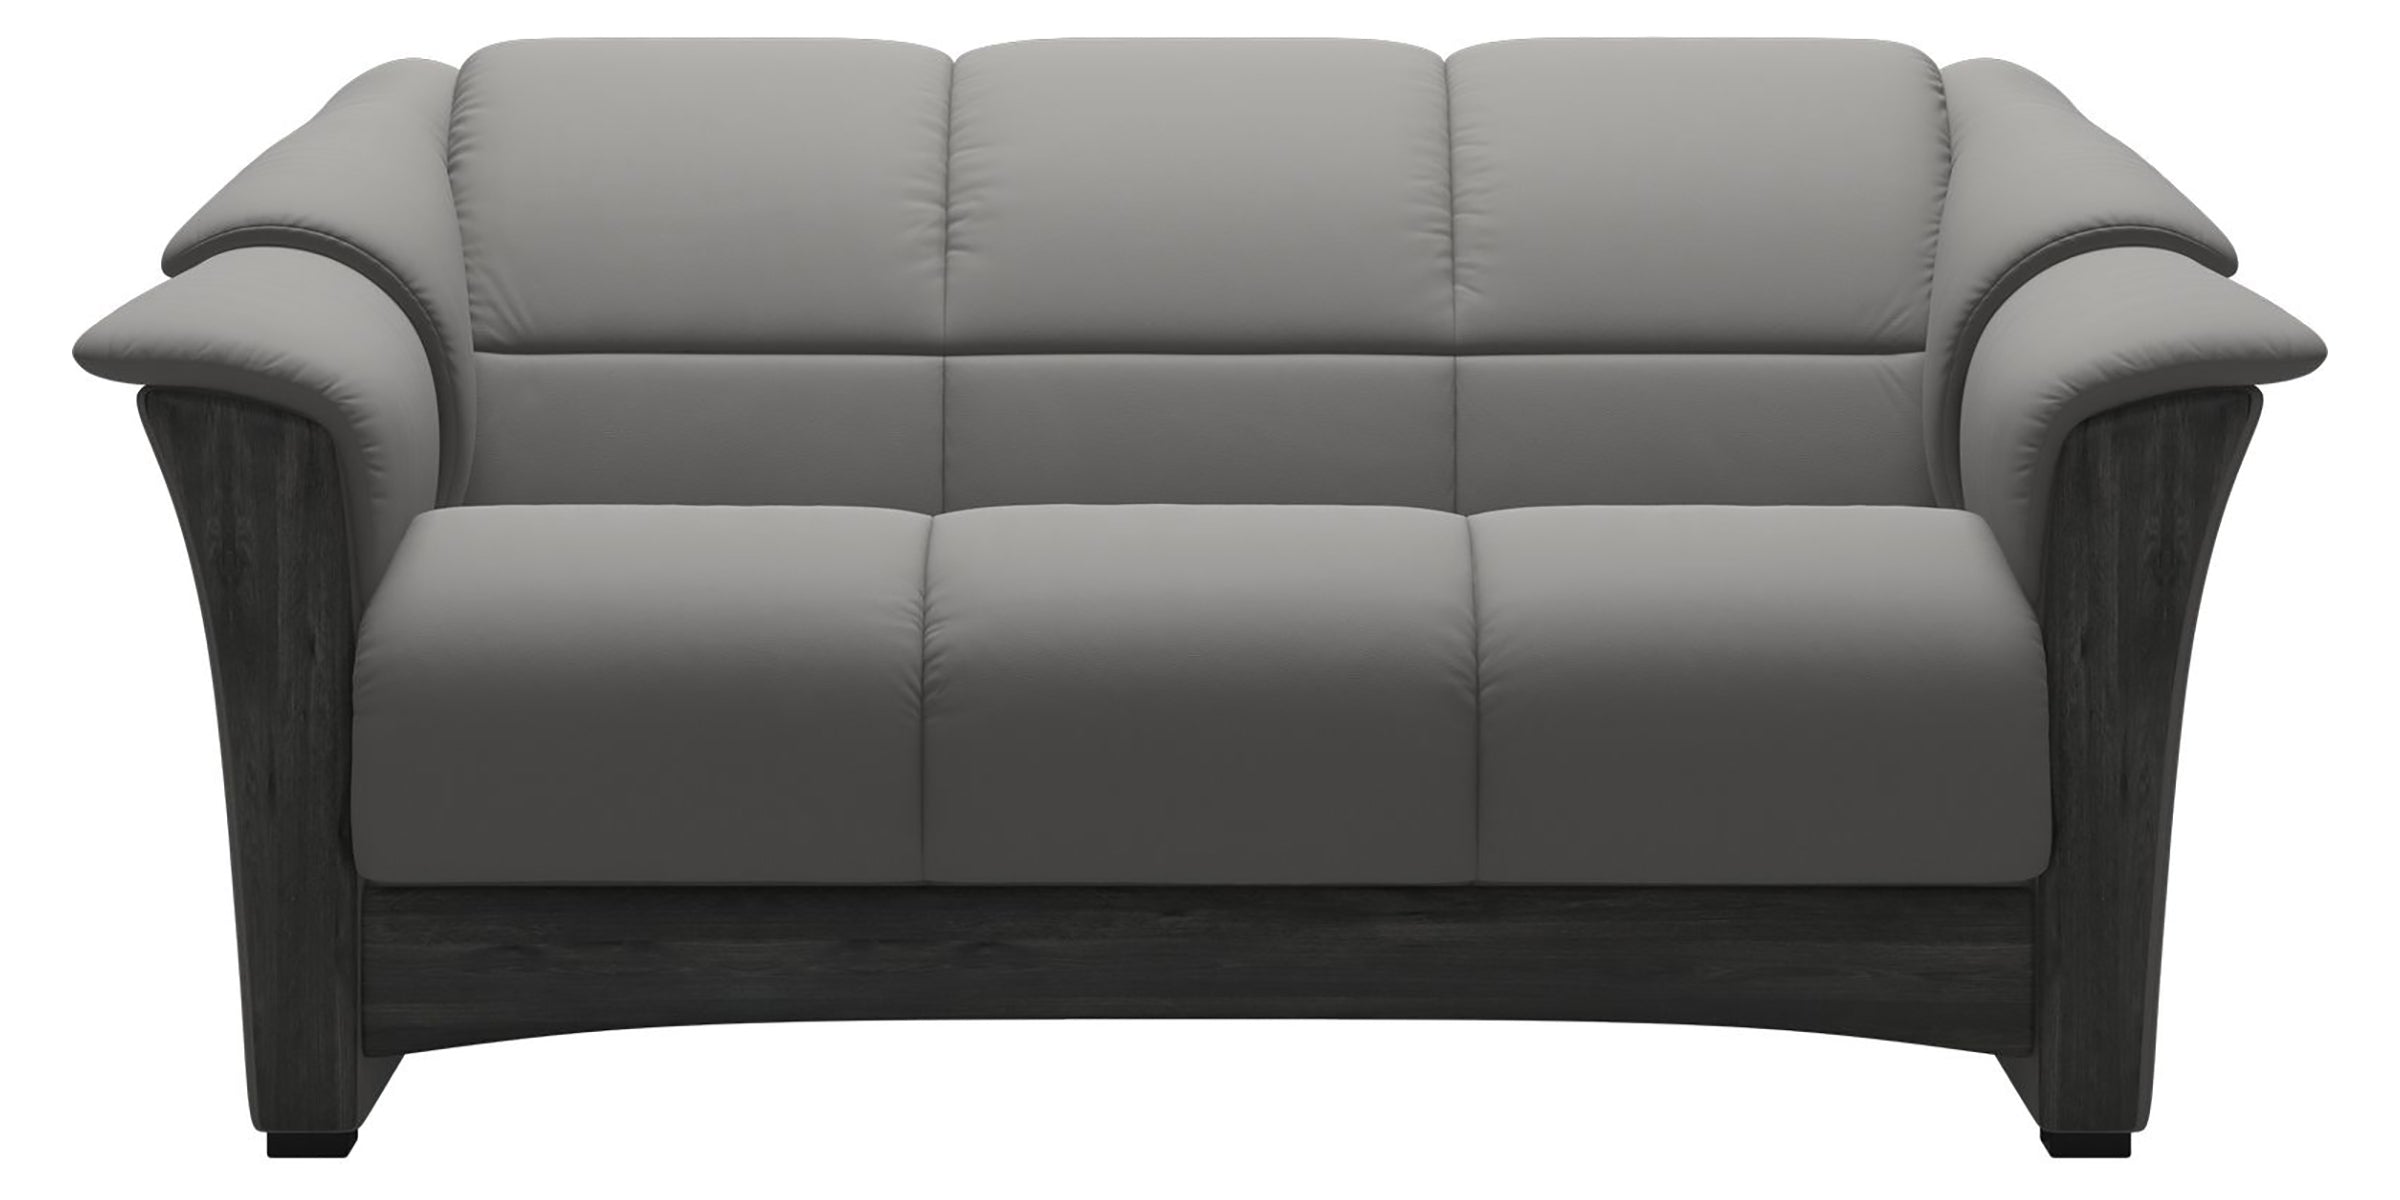 Paloma Leather Silver Grey and Grey Base | Stressless Oslo Loveseat | Valley Ridge Furniture